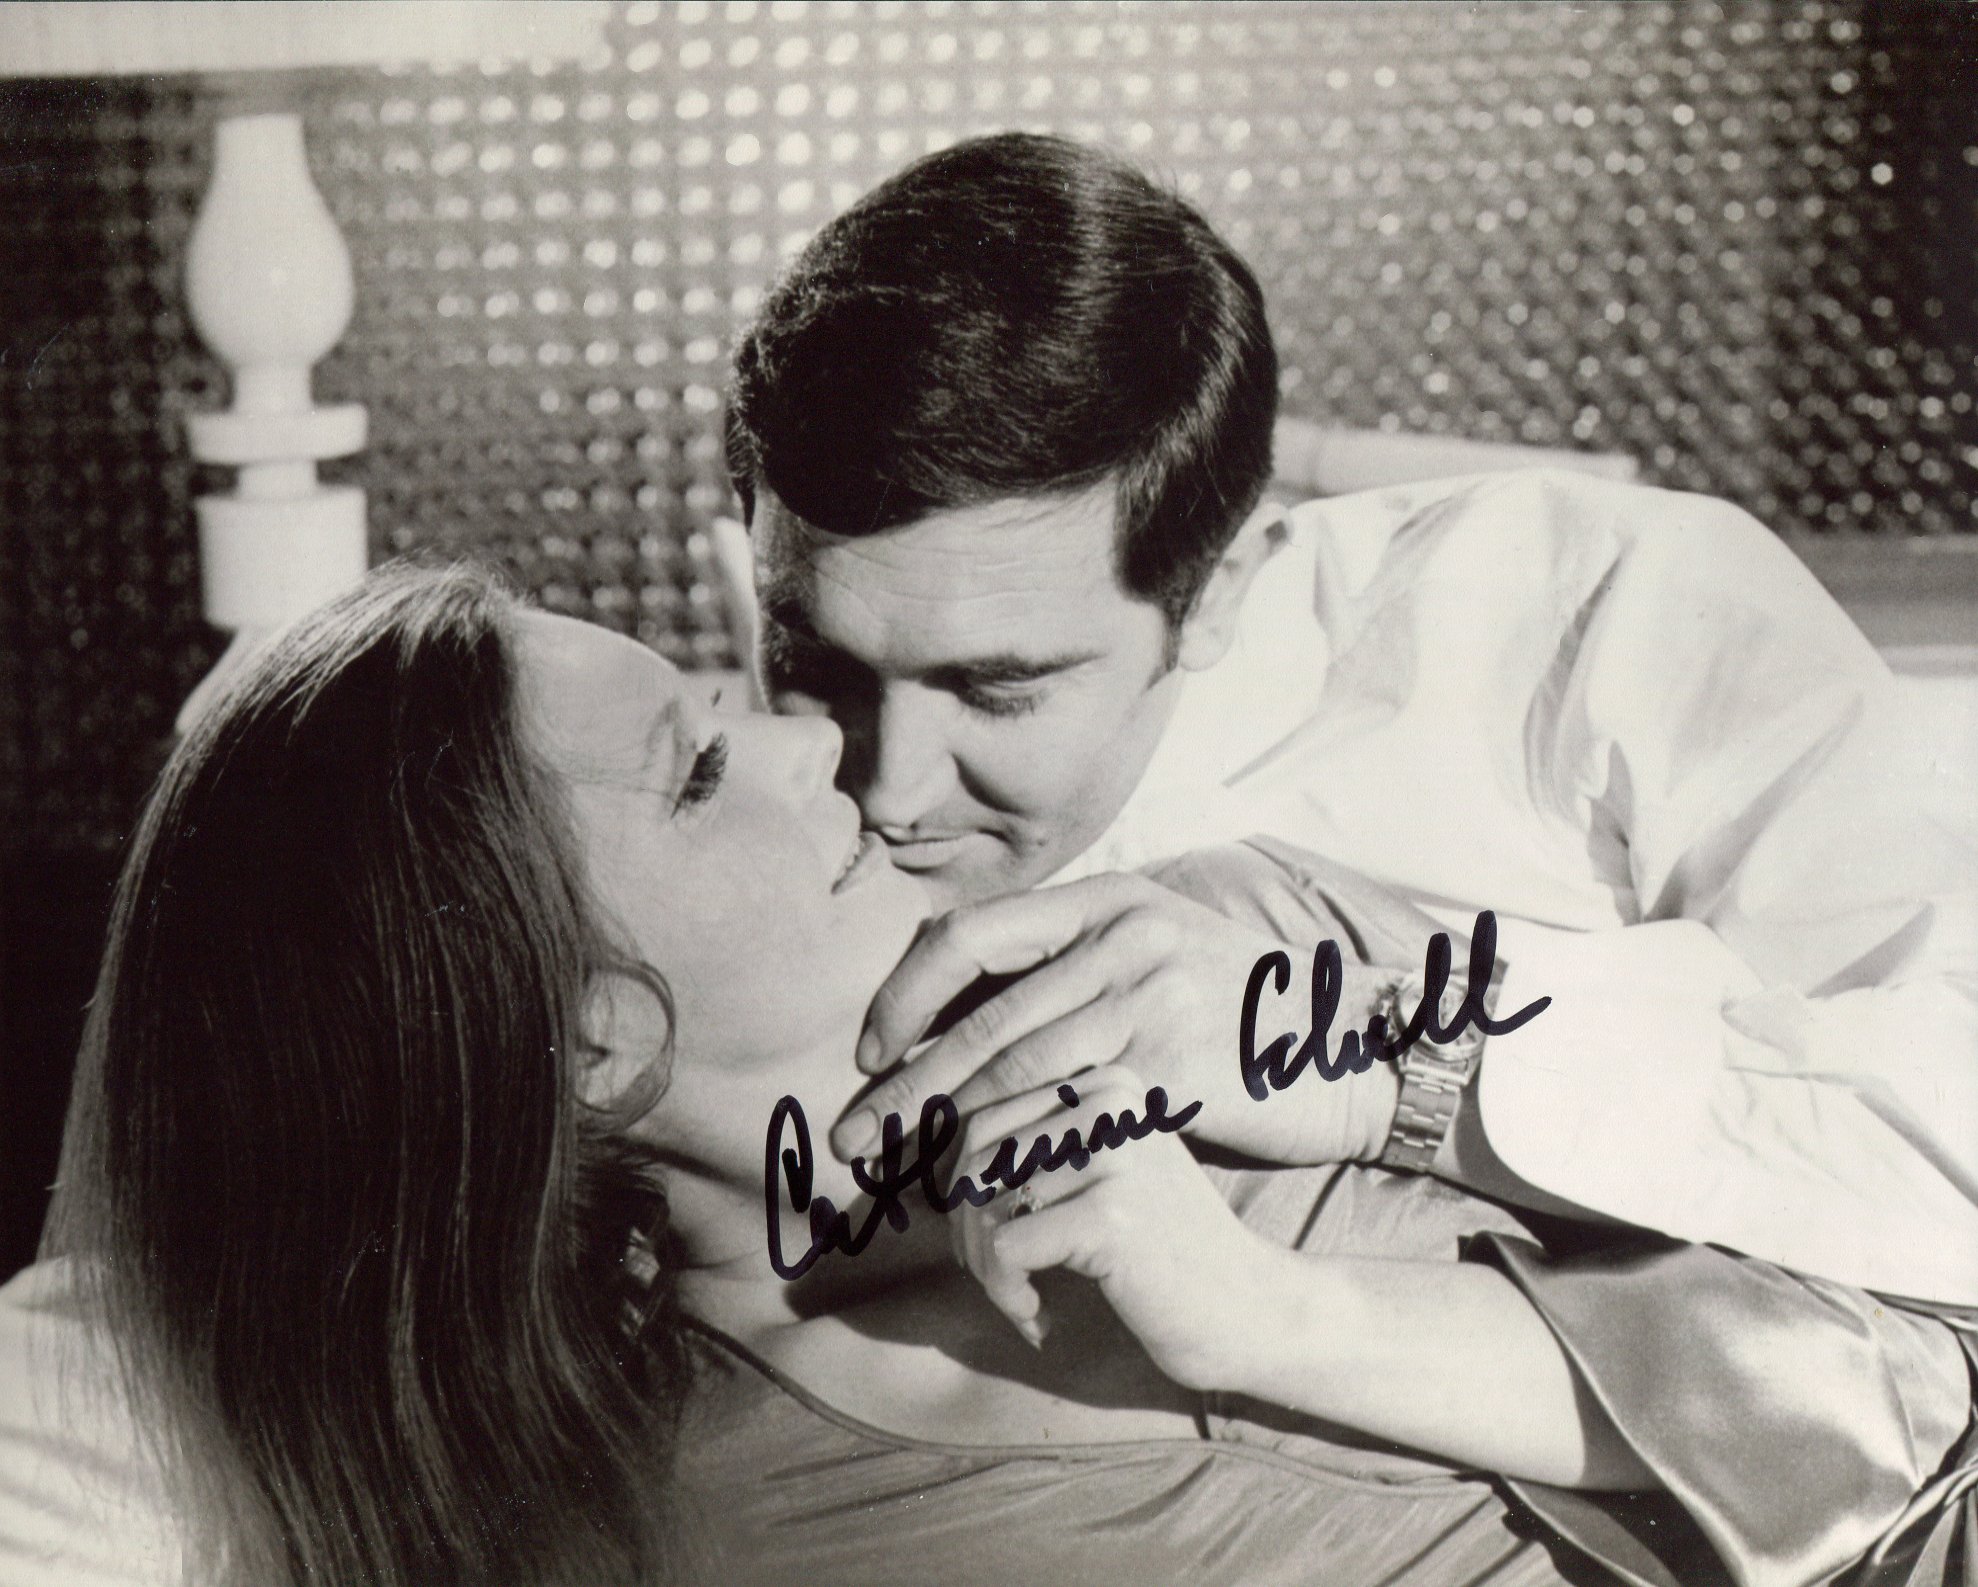 James Bond 8x10 On Her Majestys Secret Service photo signed by Catherine Schell. Good condition. All